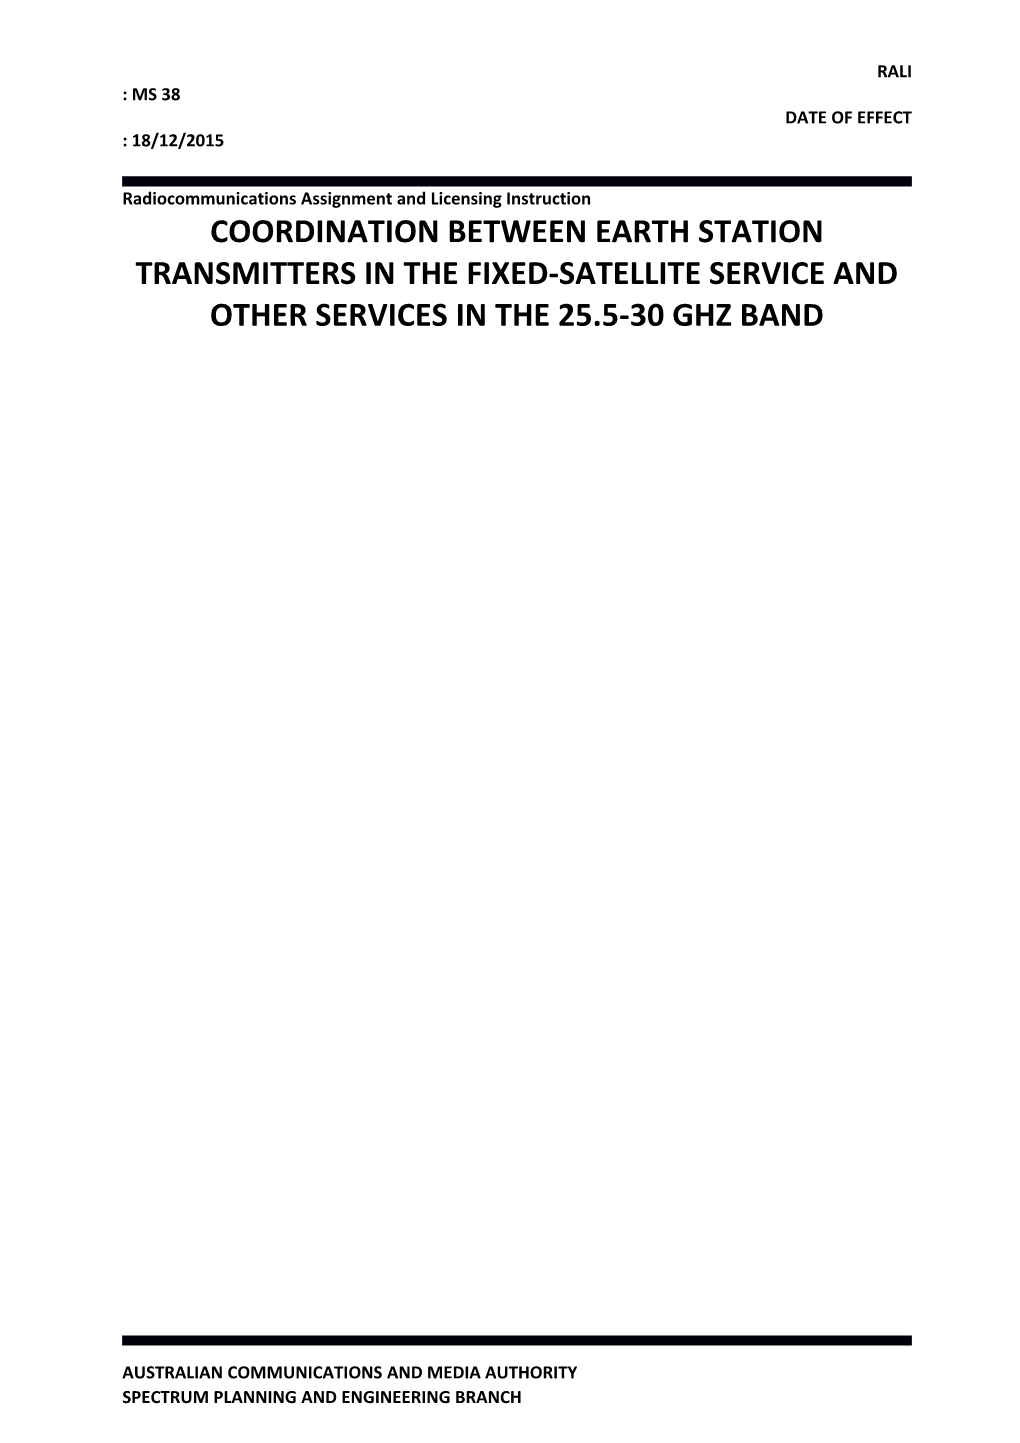 Coordination Between Earth Station Transmitters in the Fixed-Satellite Service Andother